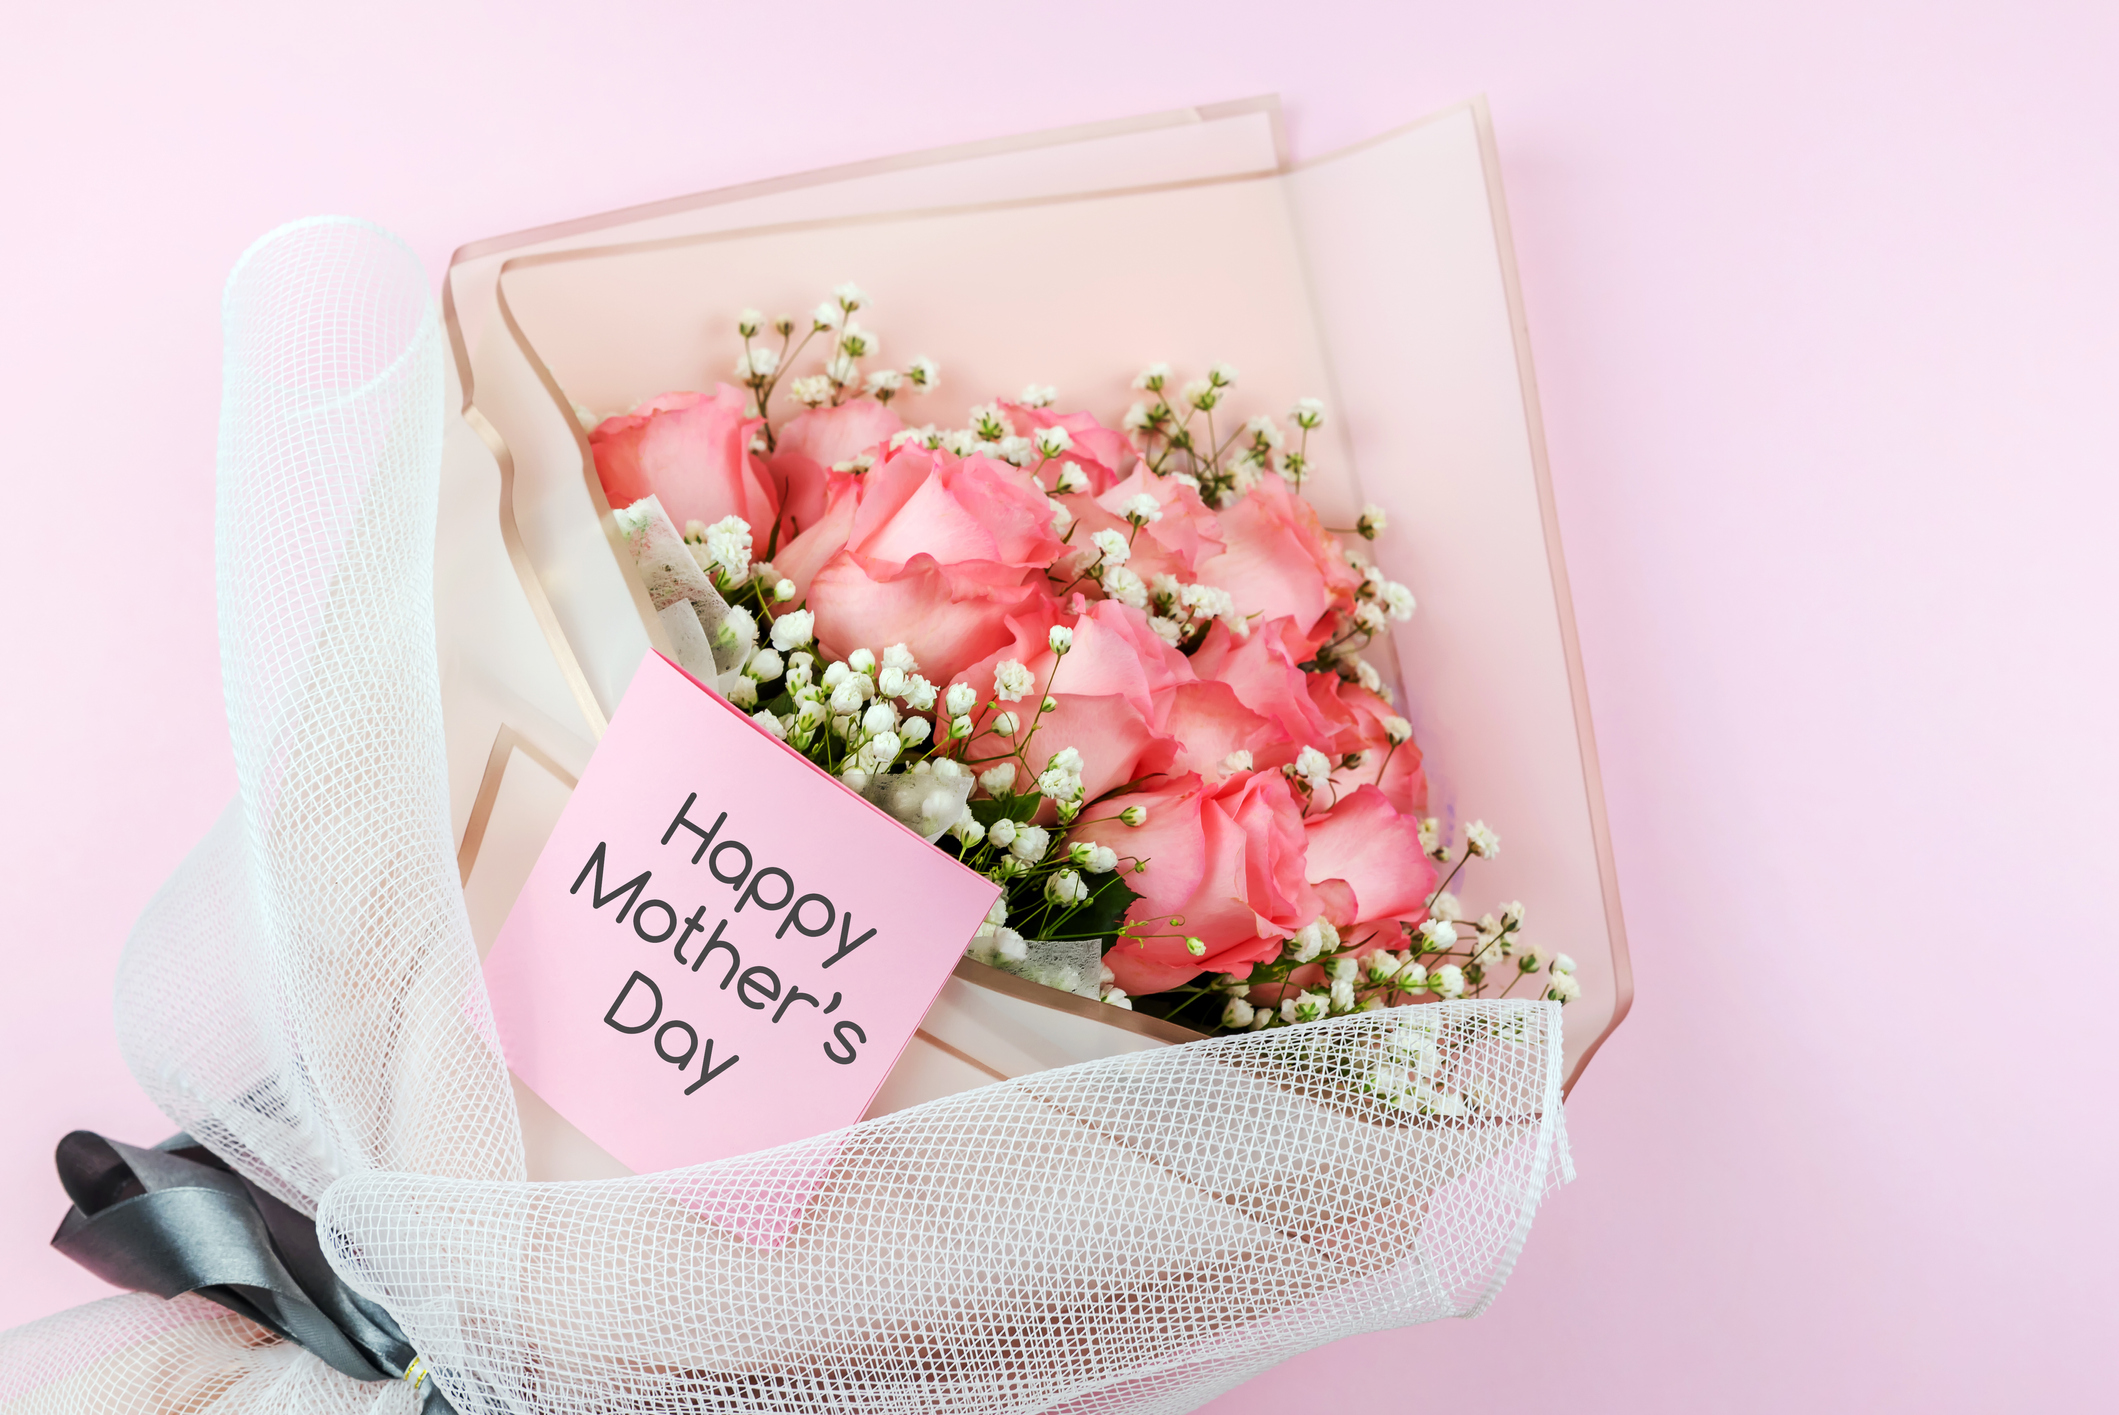 Mother’s Day Spending Expected To Reach Record .7 Billion This Year